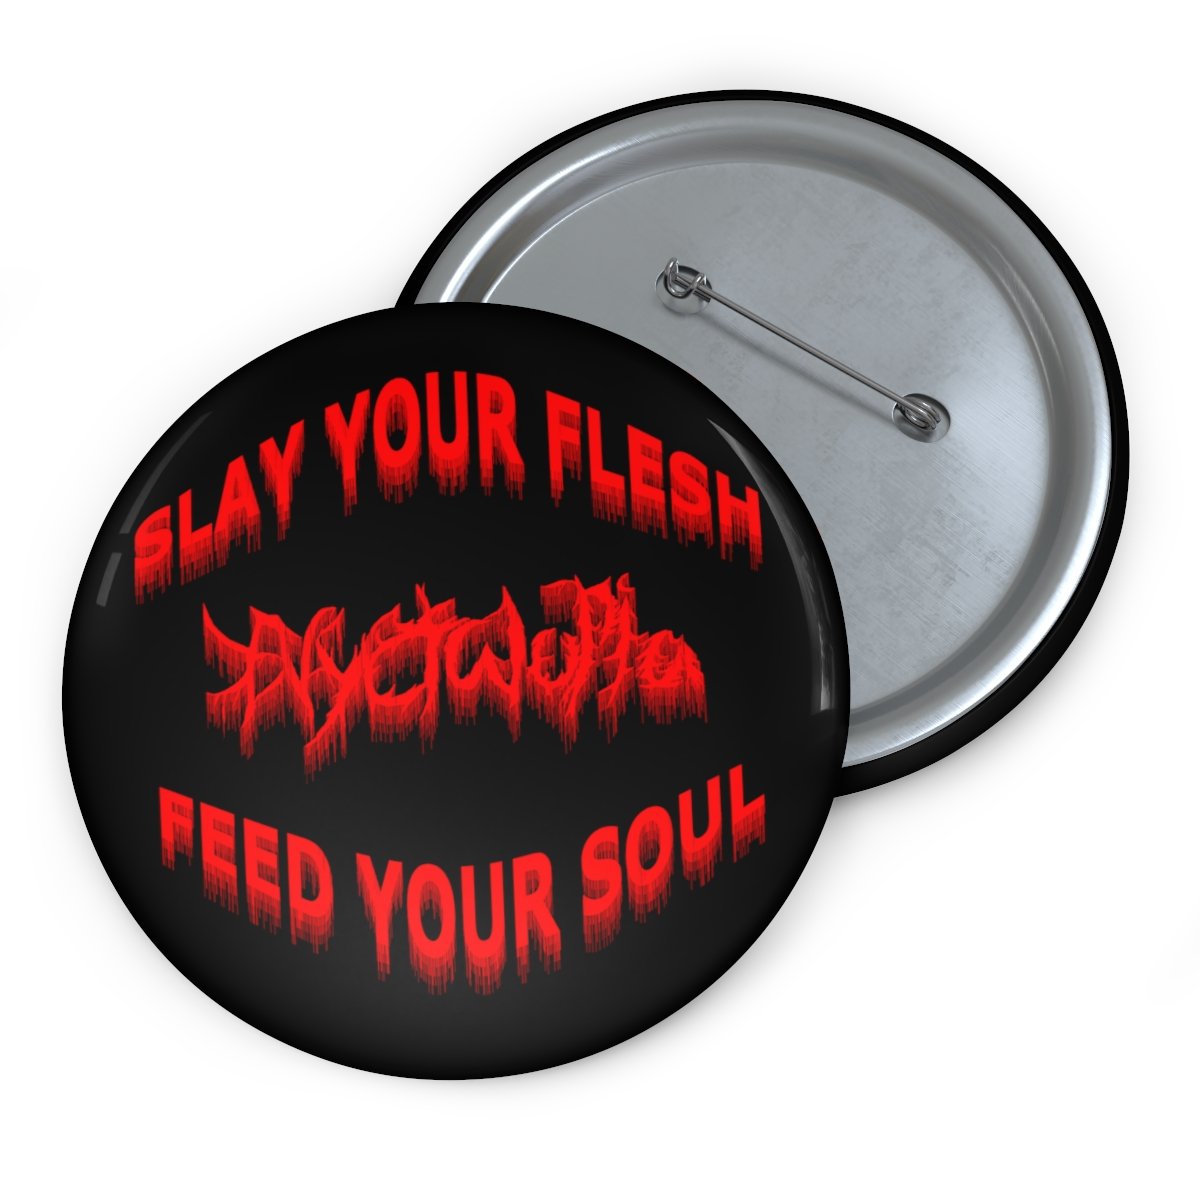 Nyctalopia Slay Your Flesh Pin Buttons